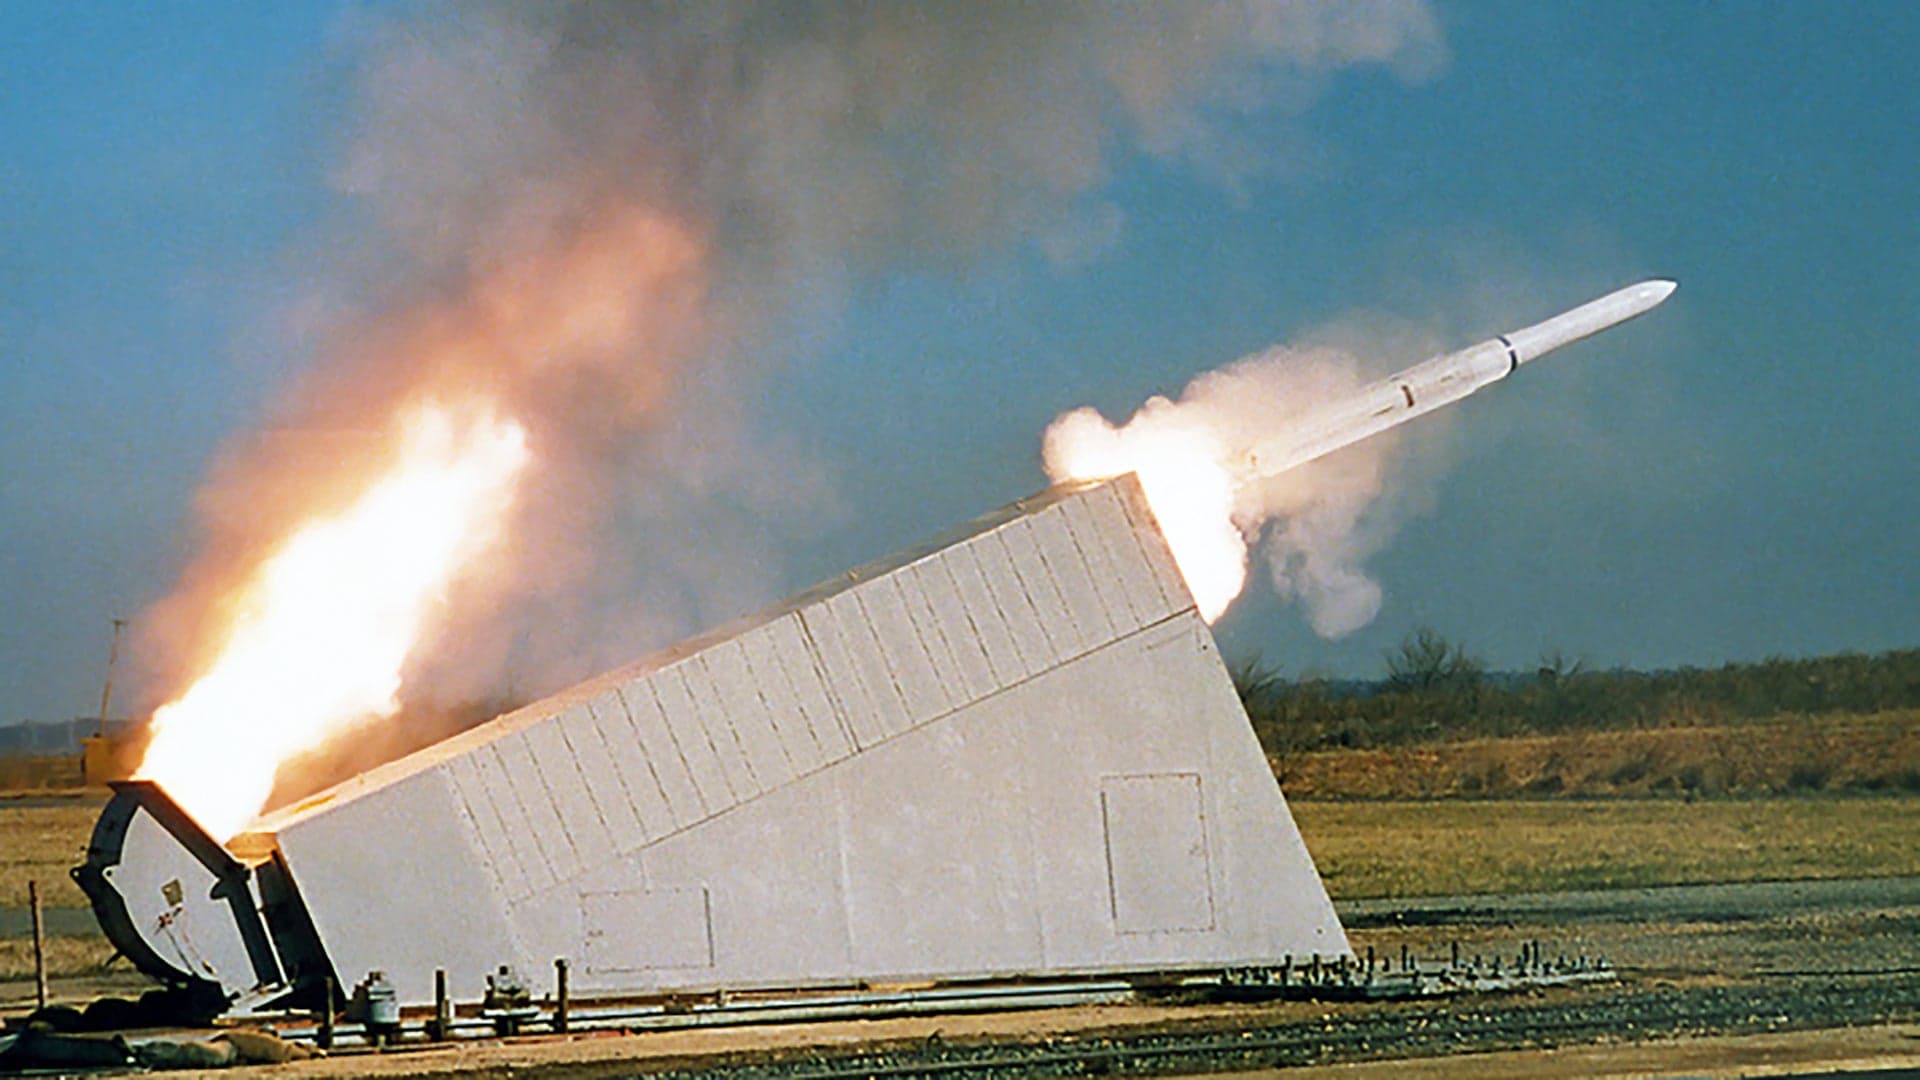 This Bolt-On Launcher Can Give Nearly Any Ship The Same Weaponry As A U.S. Navy Destroyer